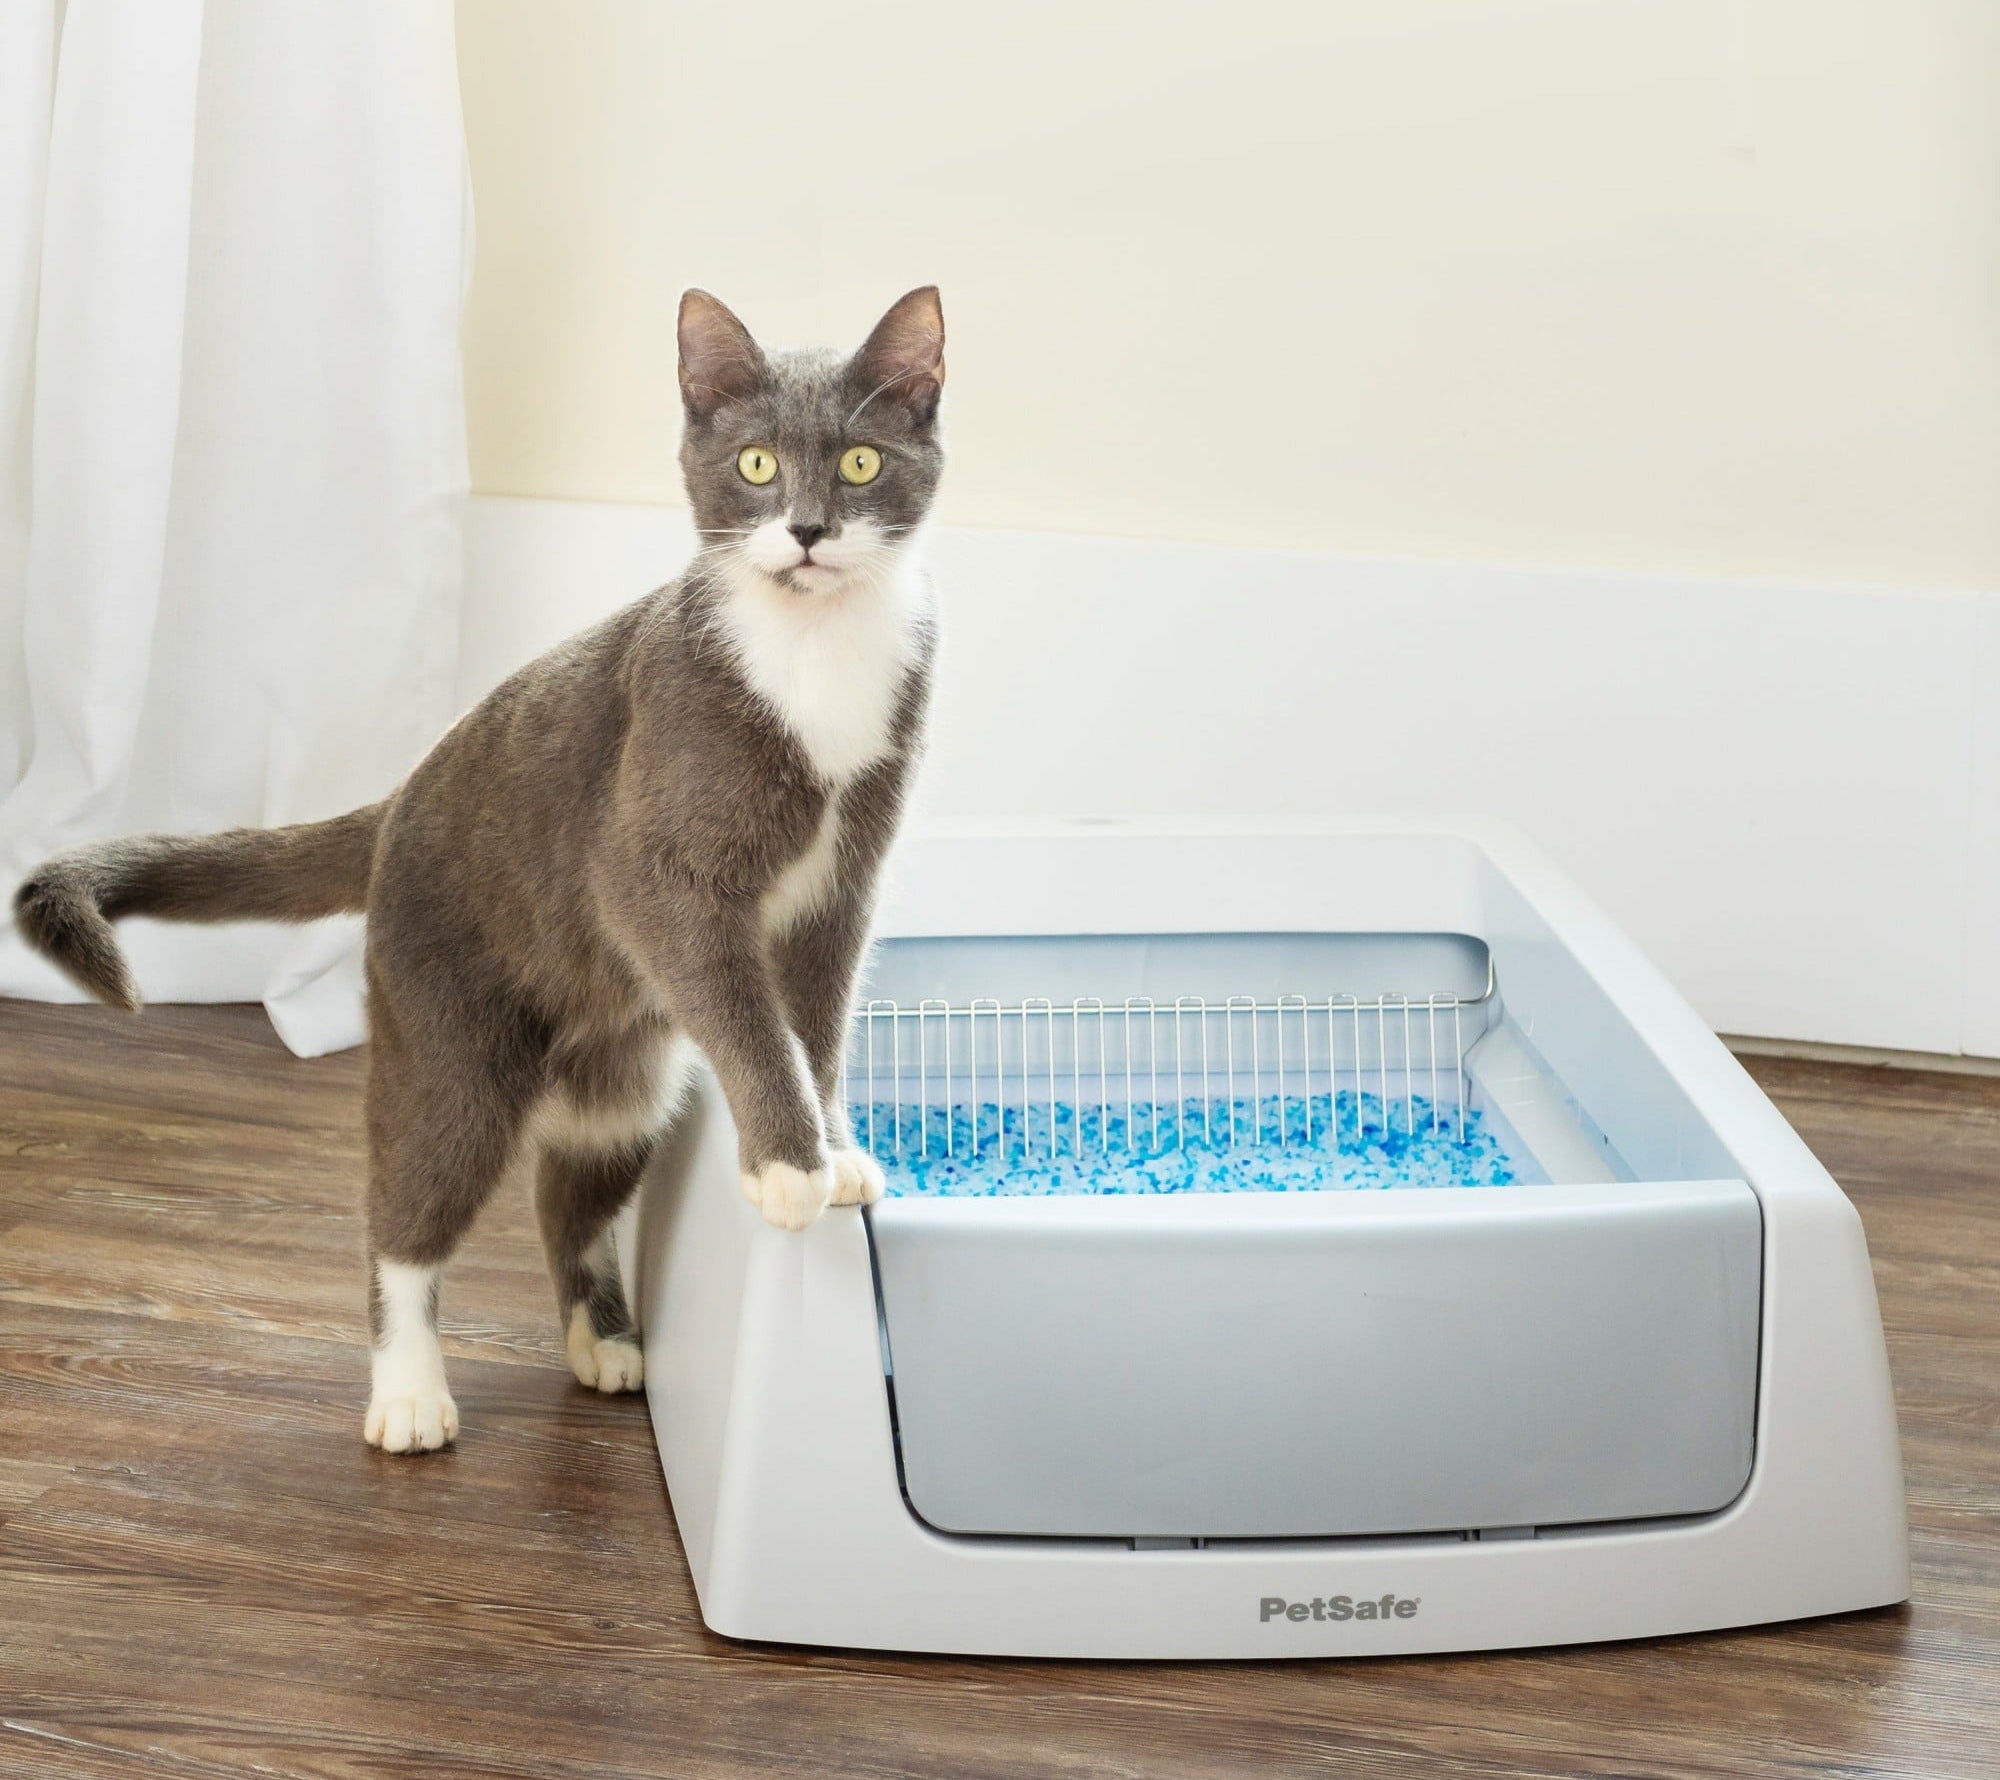 A cat with a self-cleaning litter box